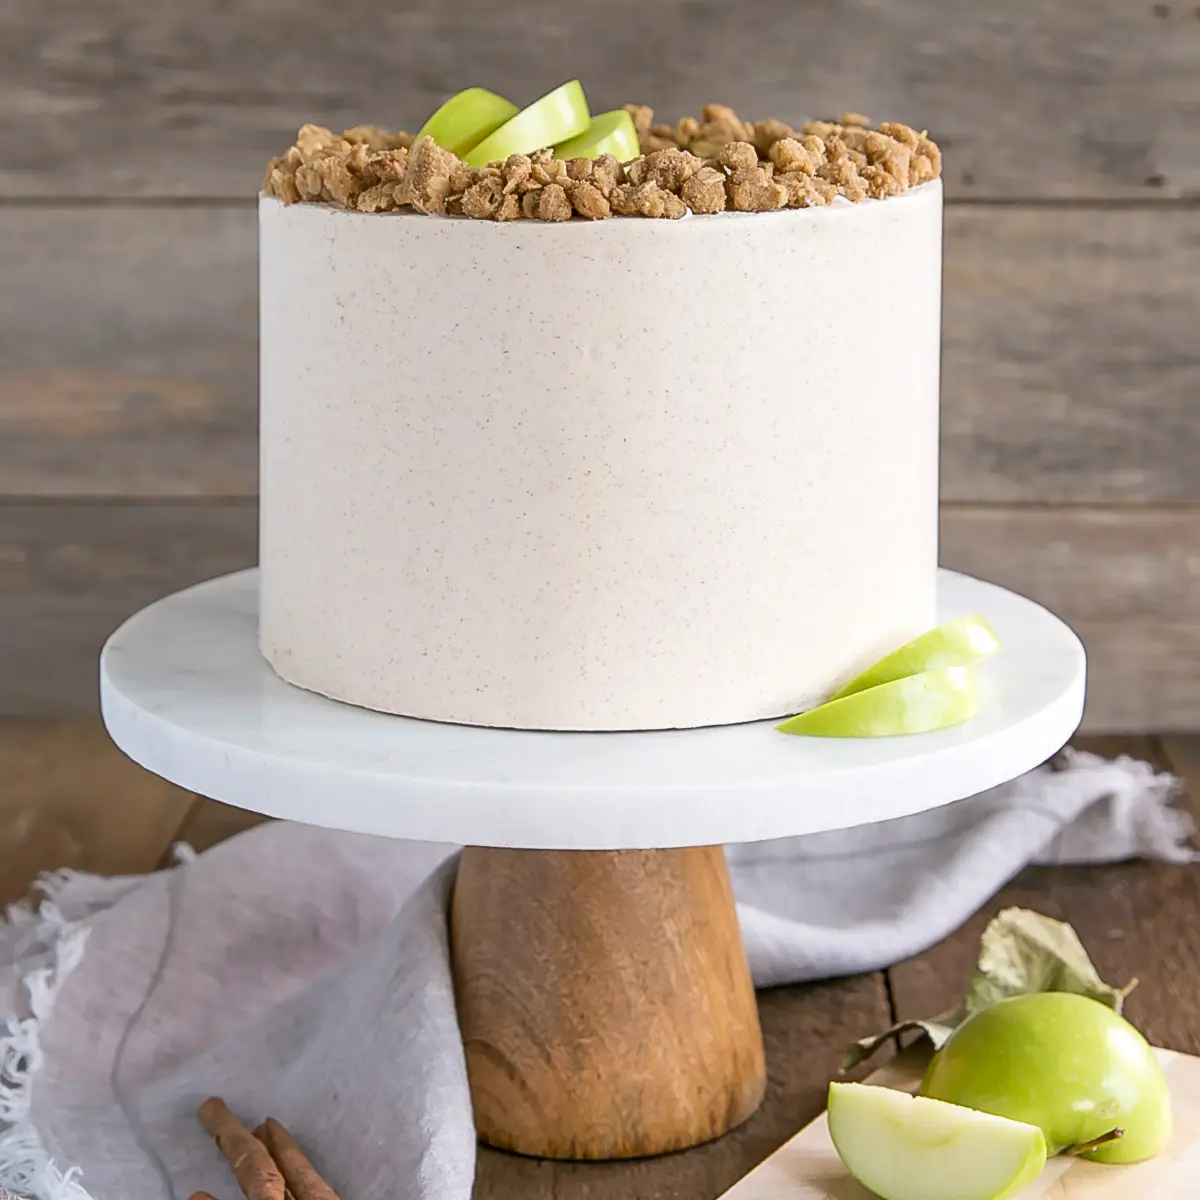 Best Dutch Apple Cake: Made With Fresh Apples